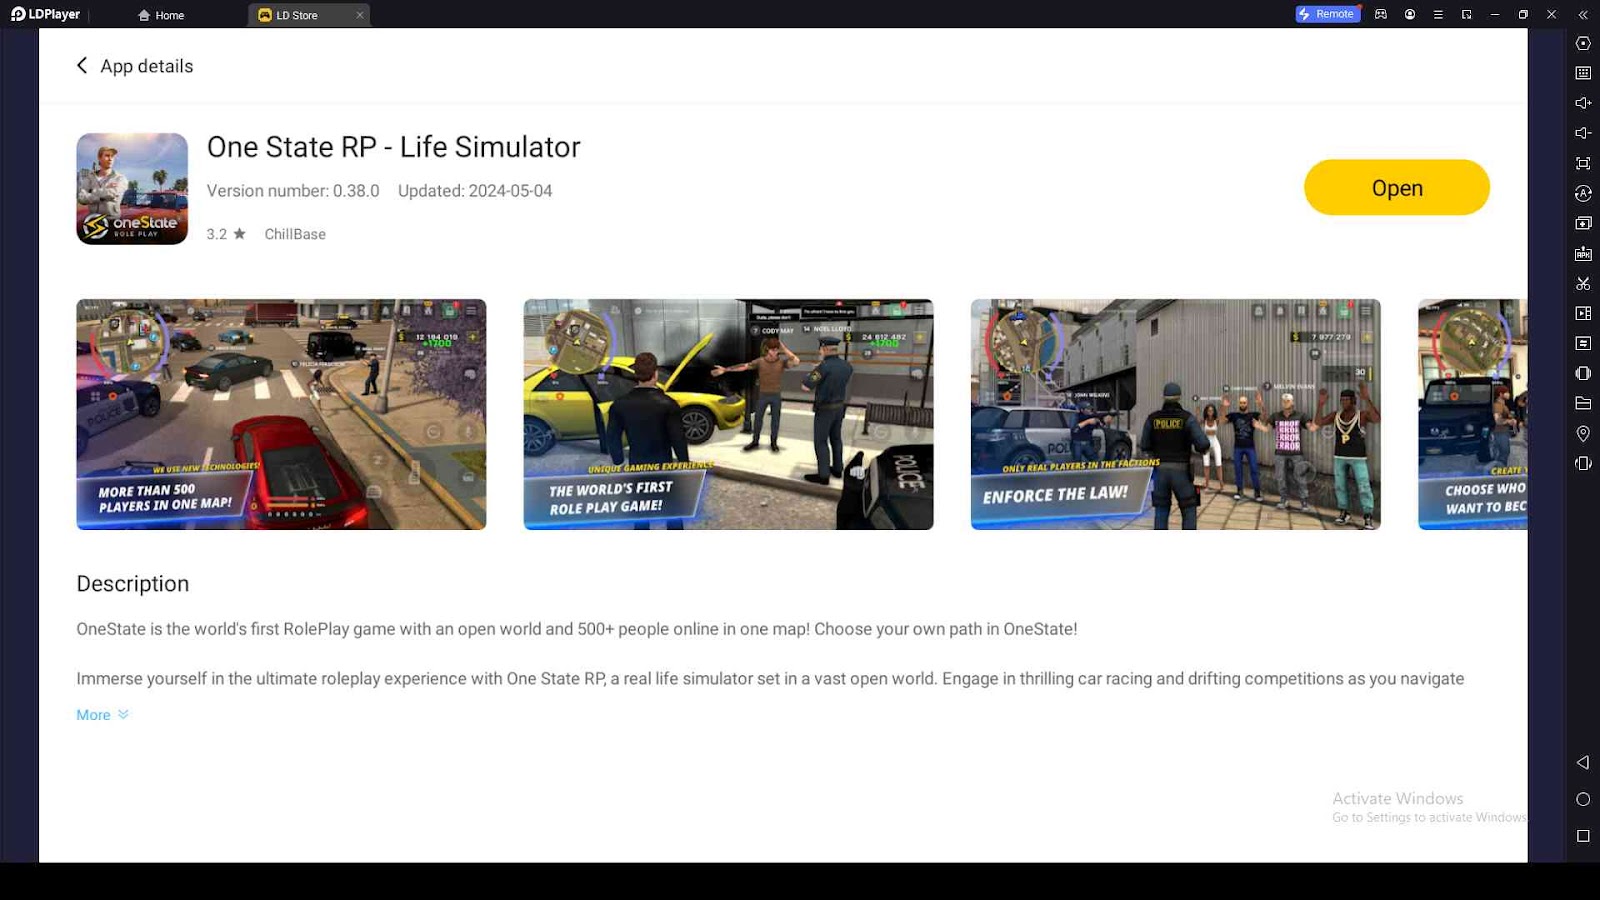 Playing One State RP – Life Simulator on LDPlayer